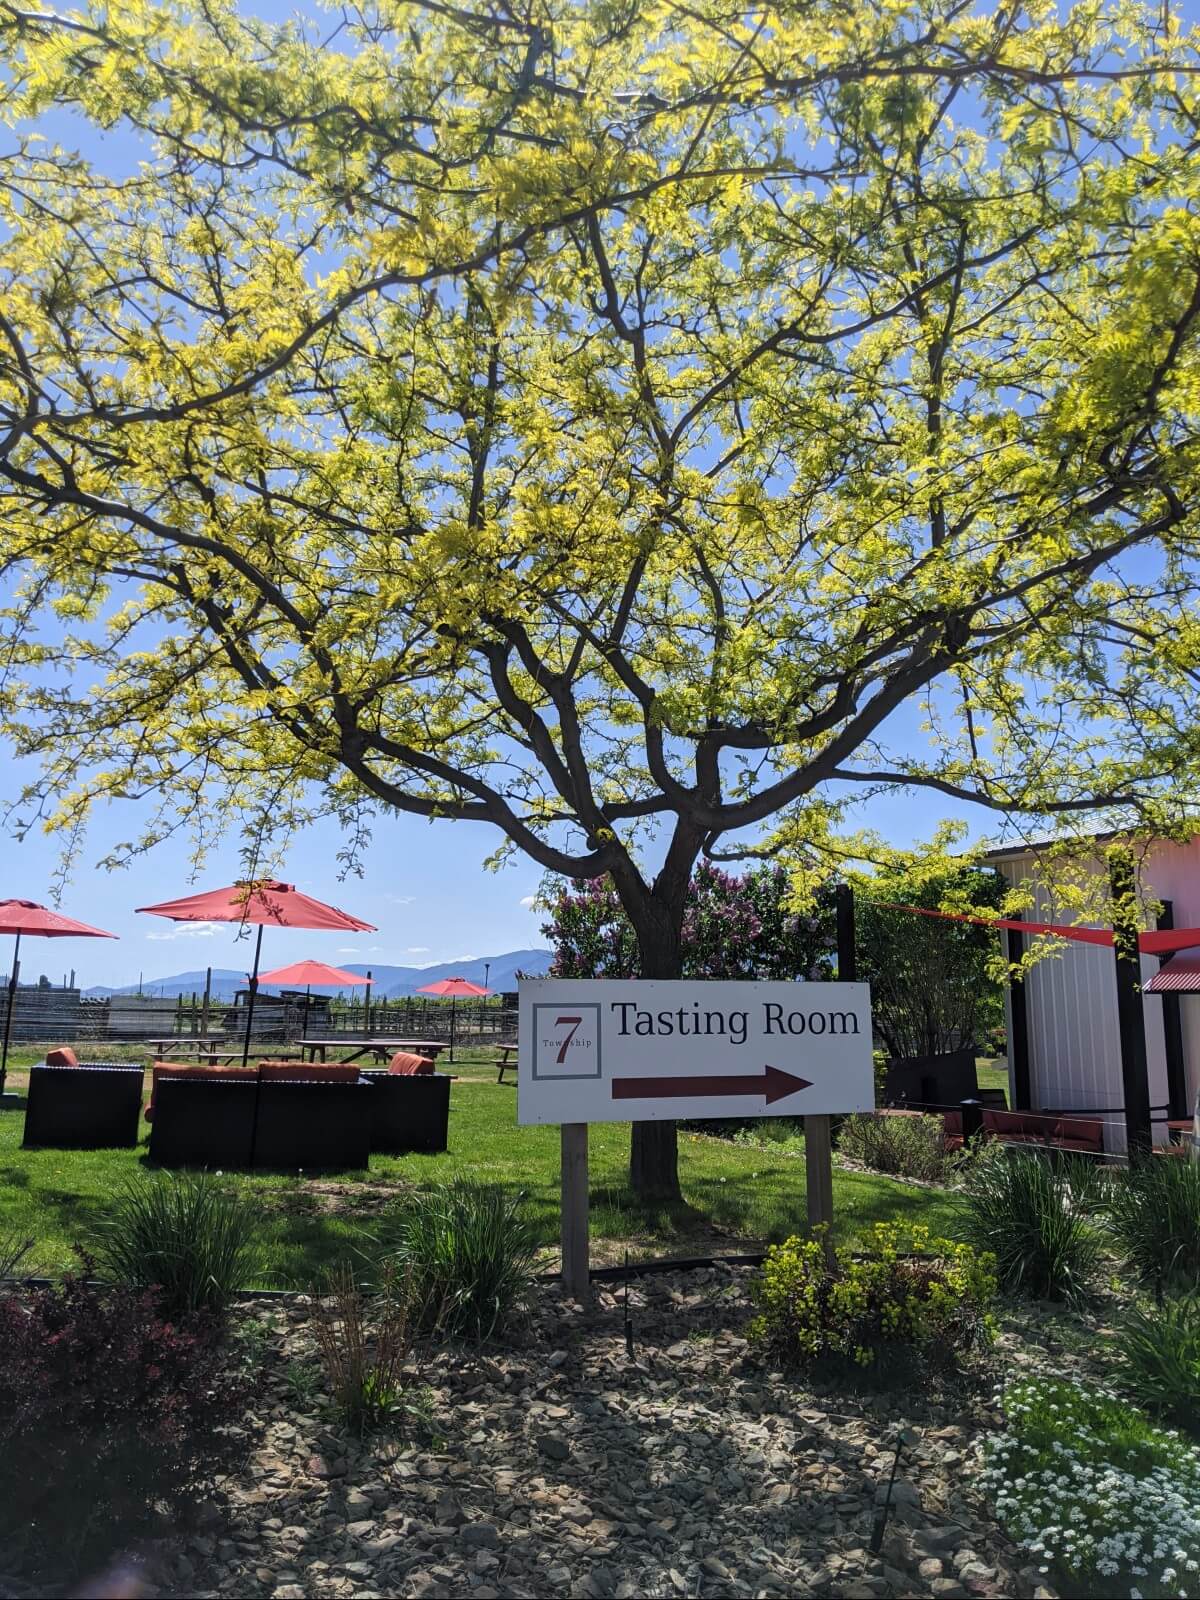 Township 7 Winery tasting room sign with arrow in front of outdoor tasting area, with red umbrellas visible to the left